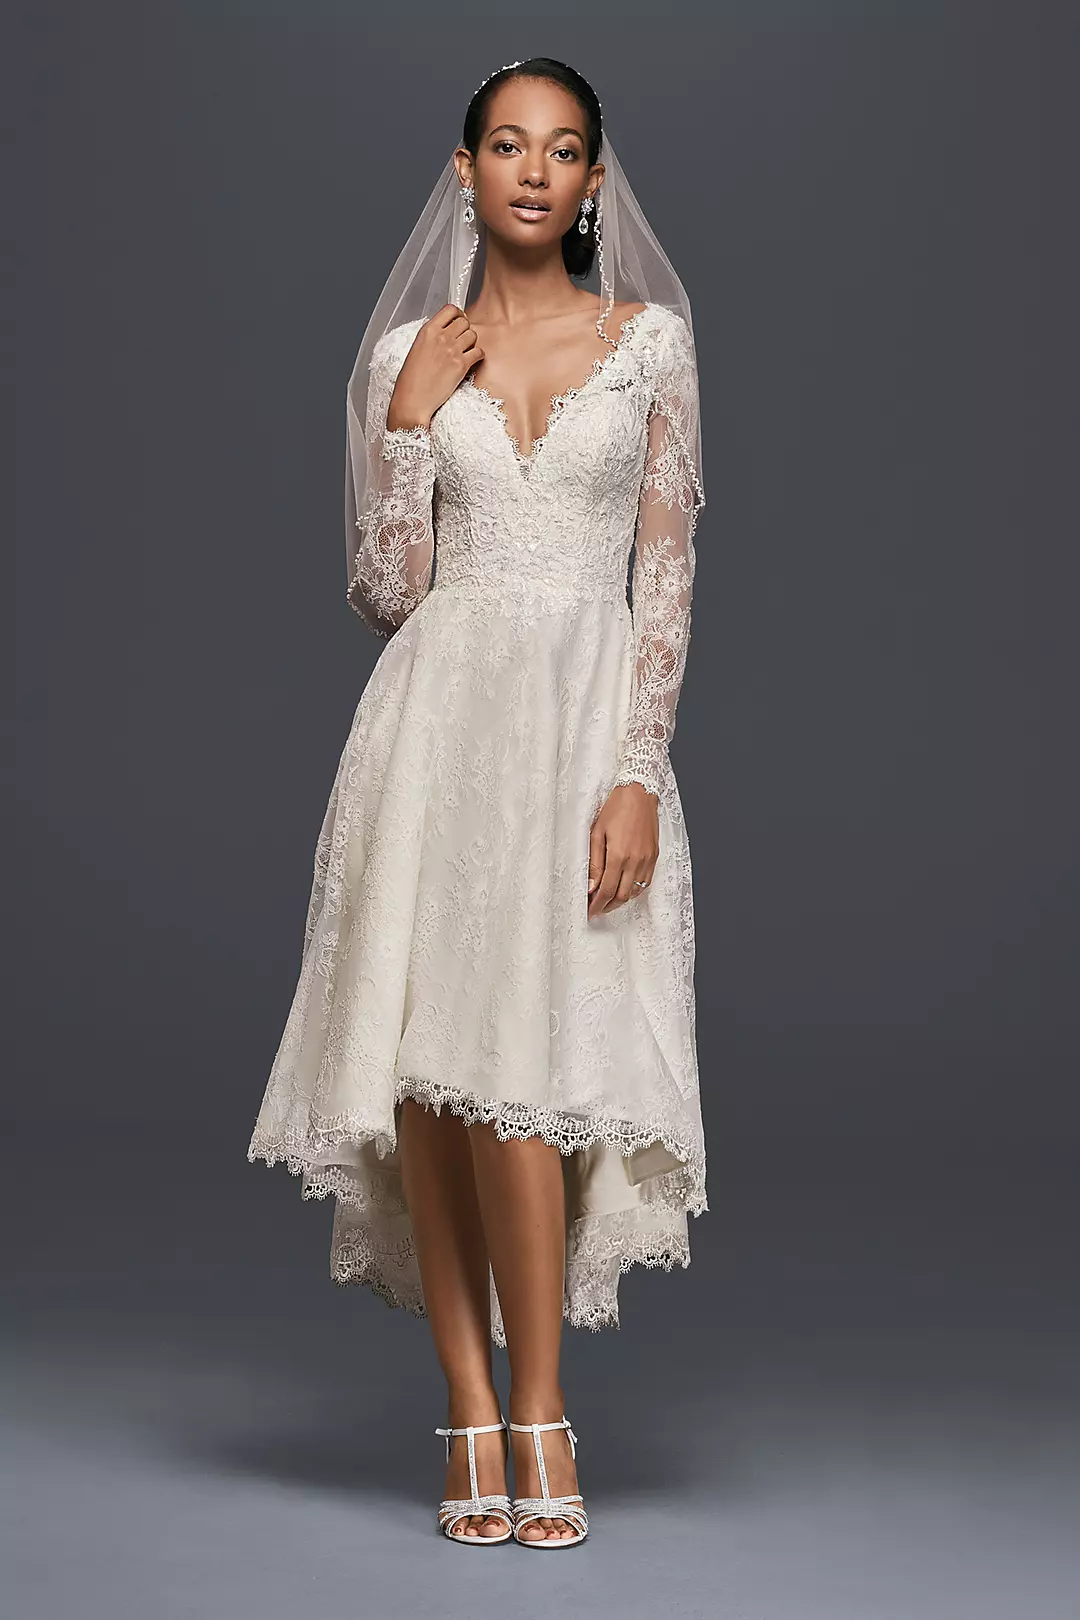 High-Low Chantilly Lace Wedding Dress Image